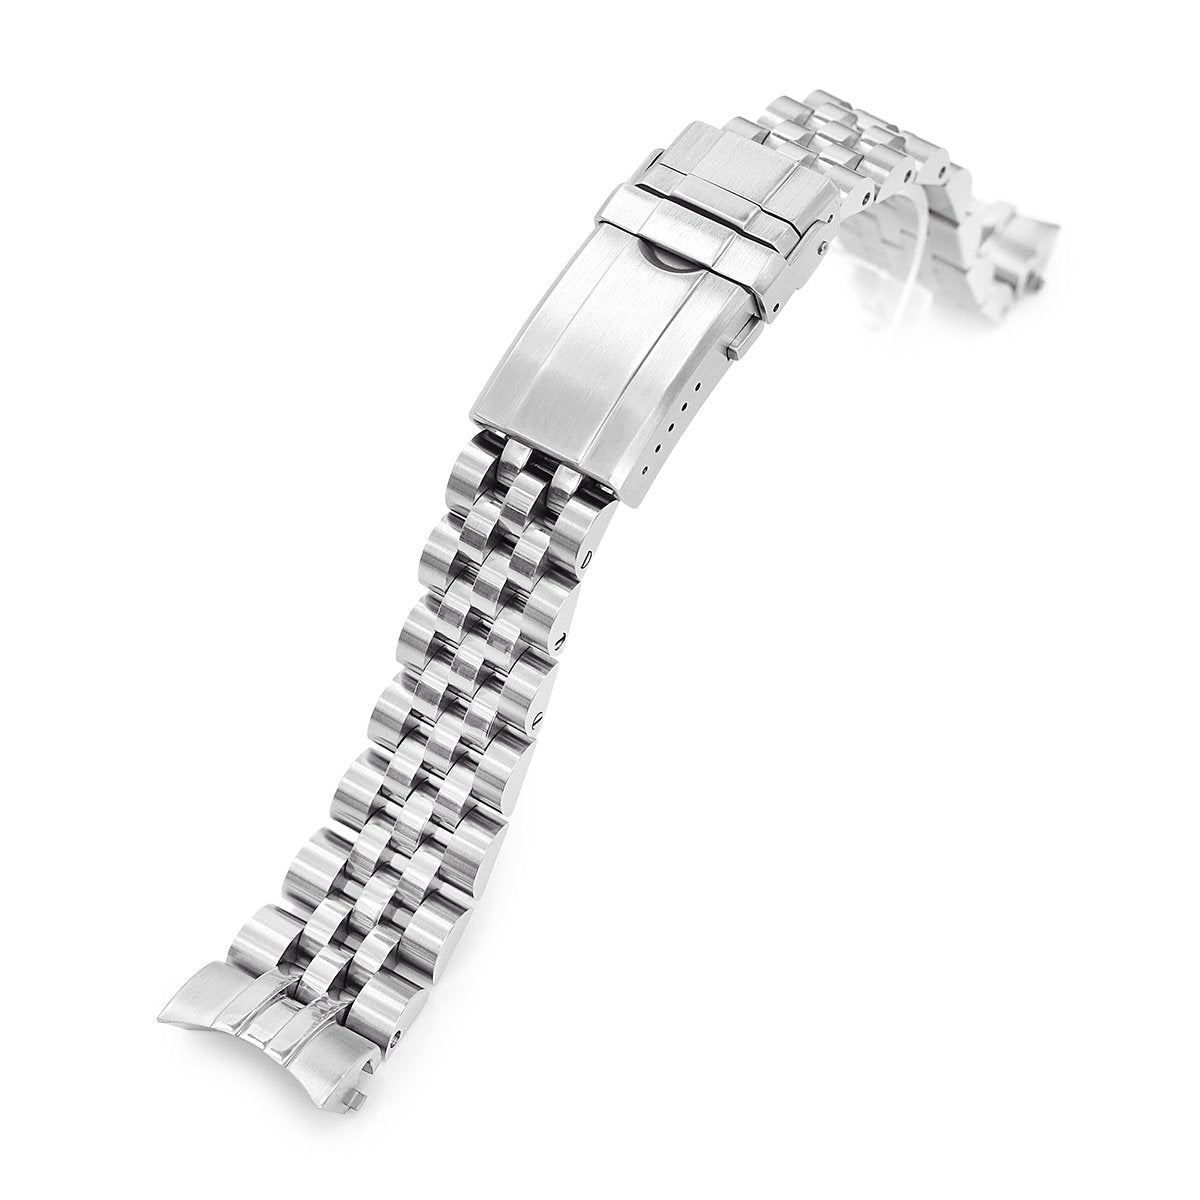 Beyond the Vintage Angus Louis Watch Bracelet for TUD Tiger 79280 Raw Polished Turning Clasp Strapcode Watch Bands